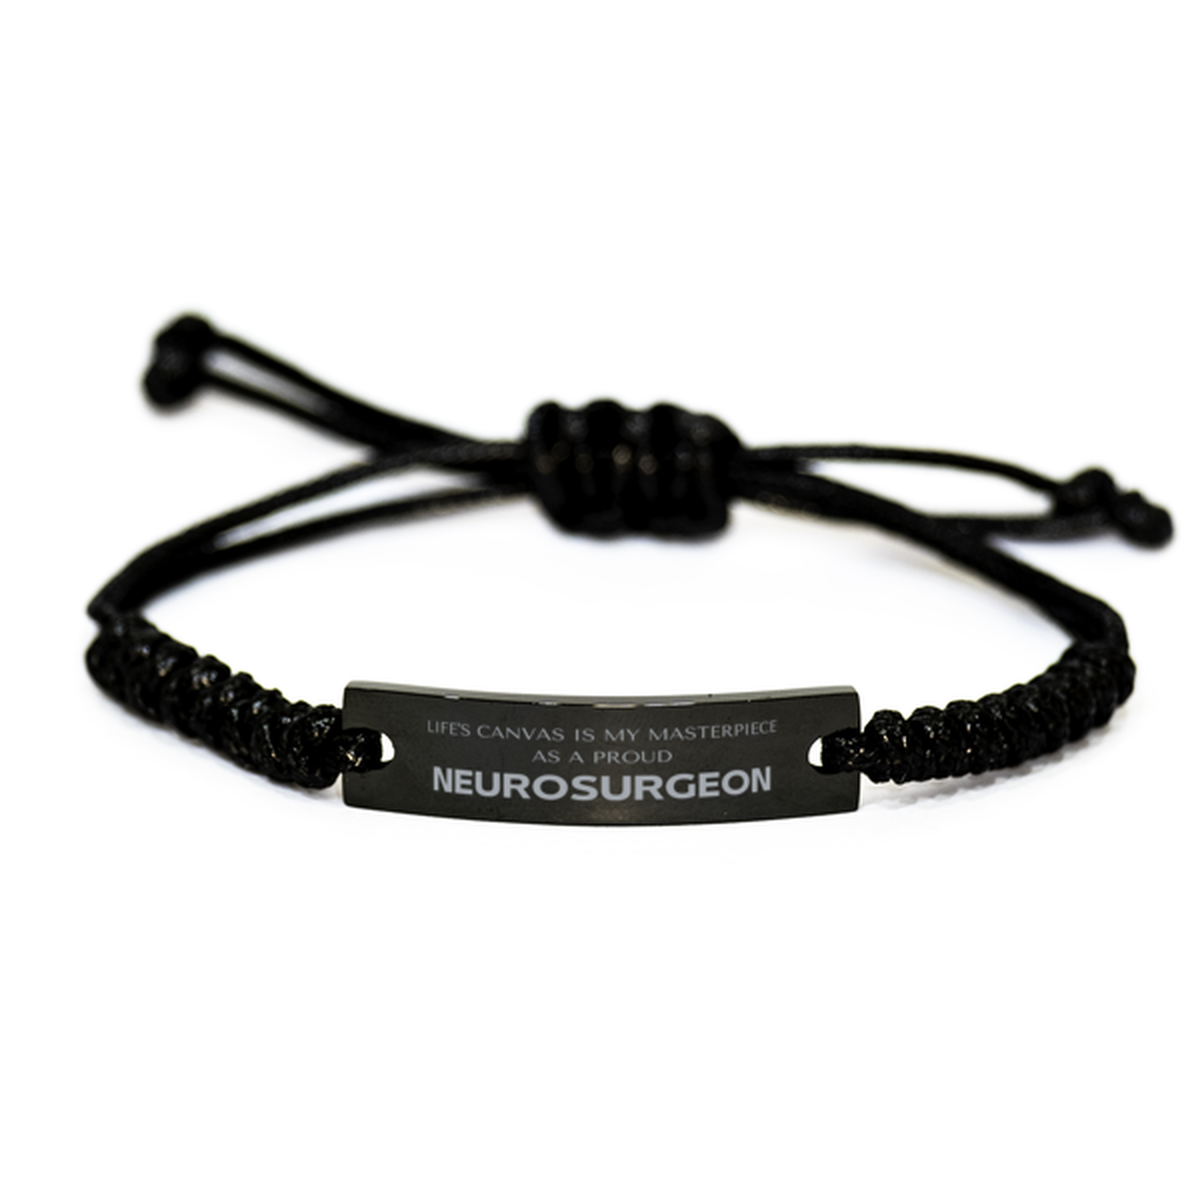 Proud Neurosurgeon Gifts, Life's canvas is my masterpiece, Epic Birthday Christmas Unique Black Rope Bracelet For Neurosurgeon, Coworkers, Men, Women, Friends